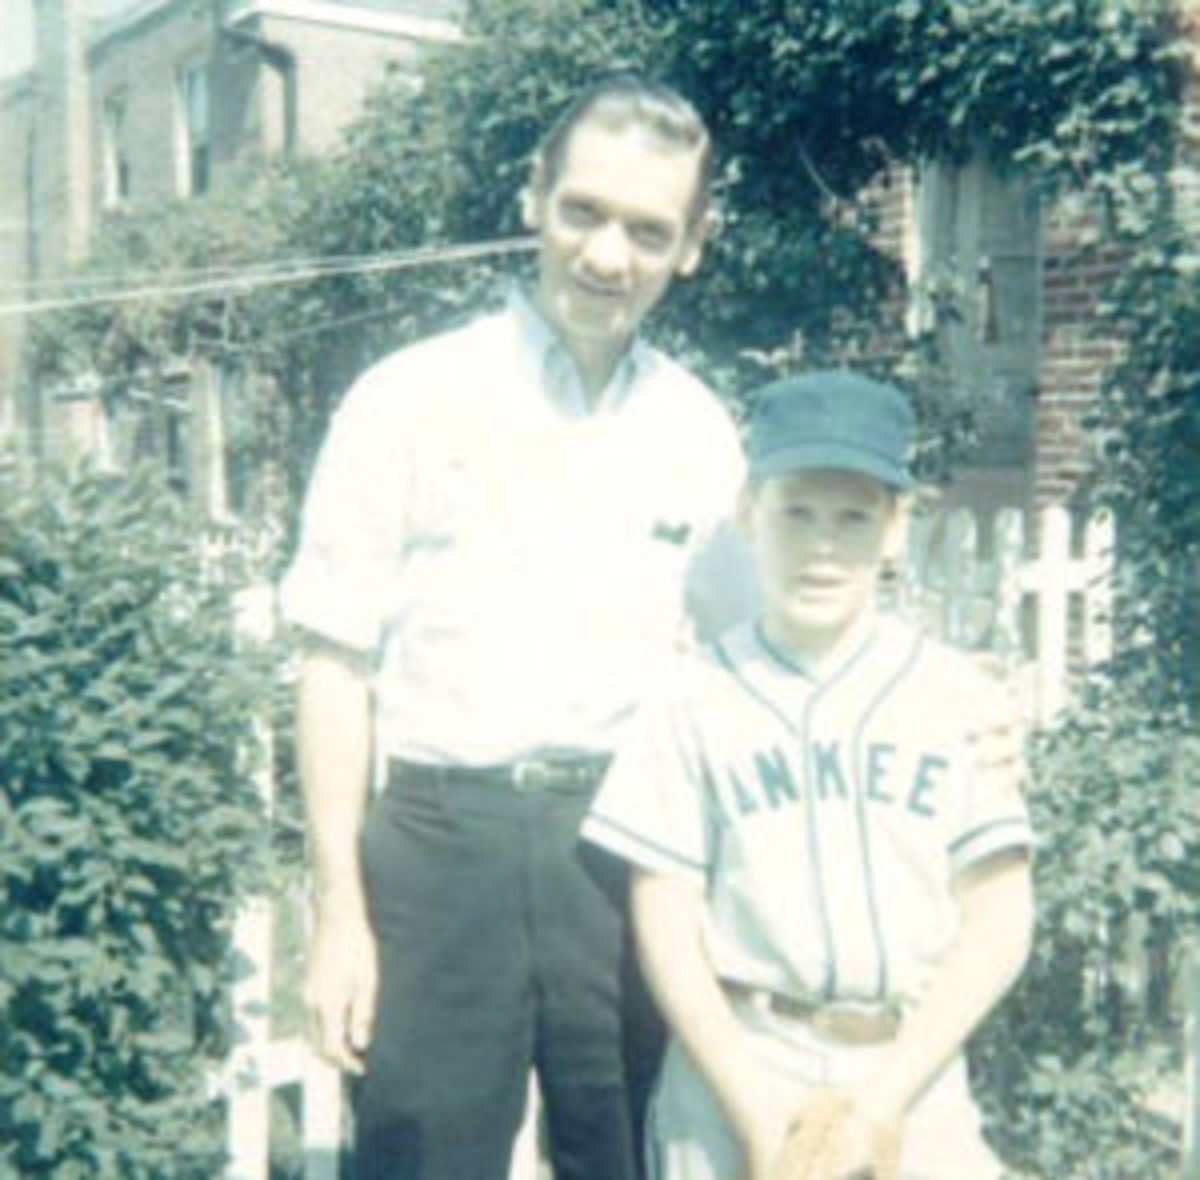  Bob Jaspersen with his son Mike in 1967. Photo courtesy Mike jaspersen